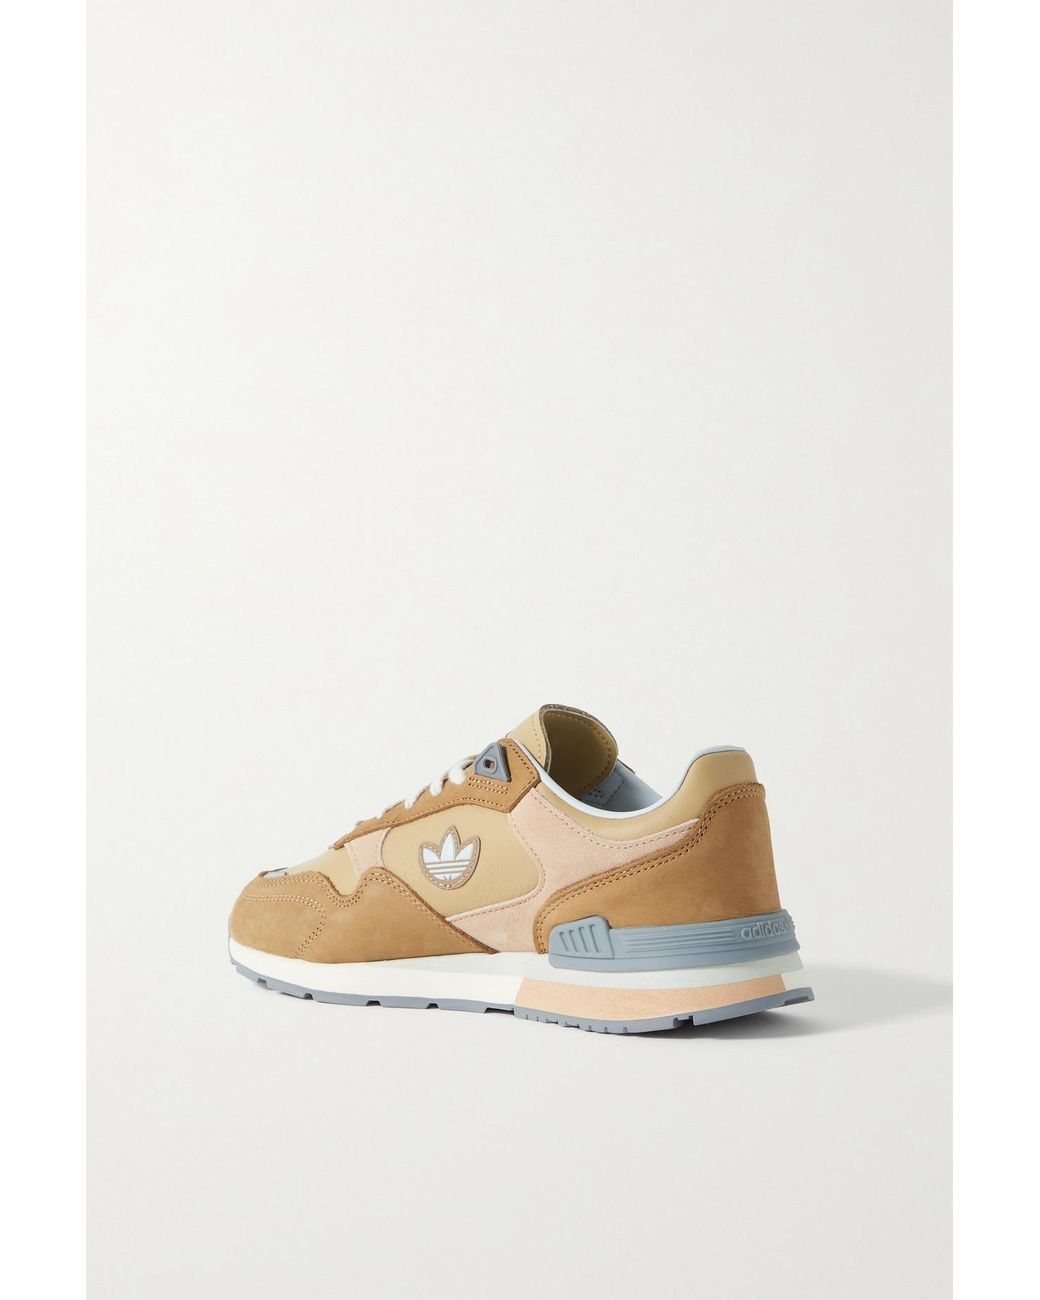 adidas Originals Treziod Nubuck And Leather Sneakers in Brown | Lyst